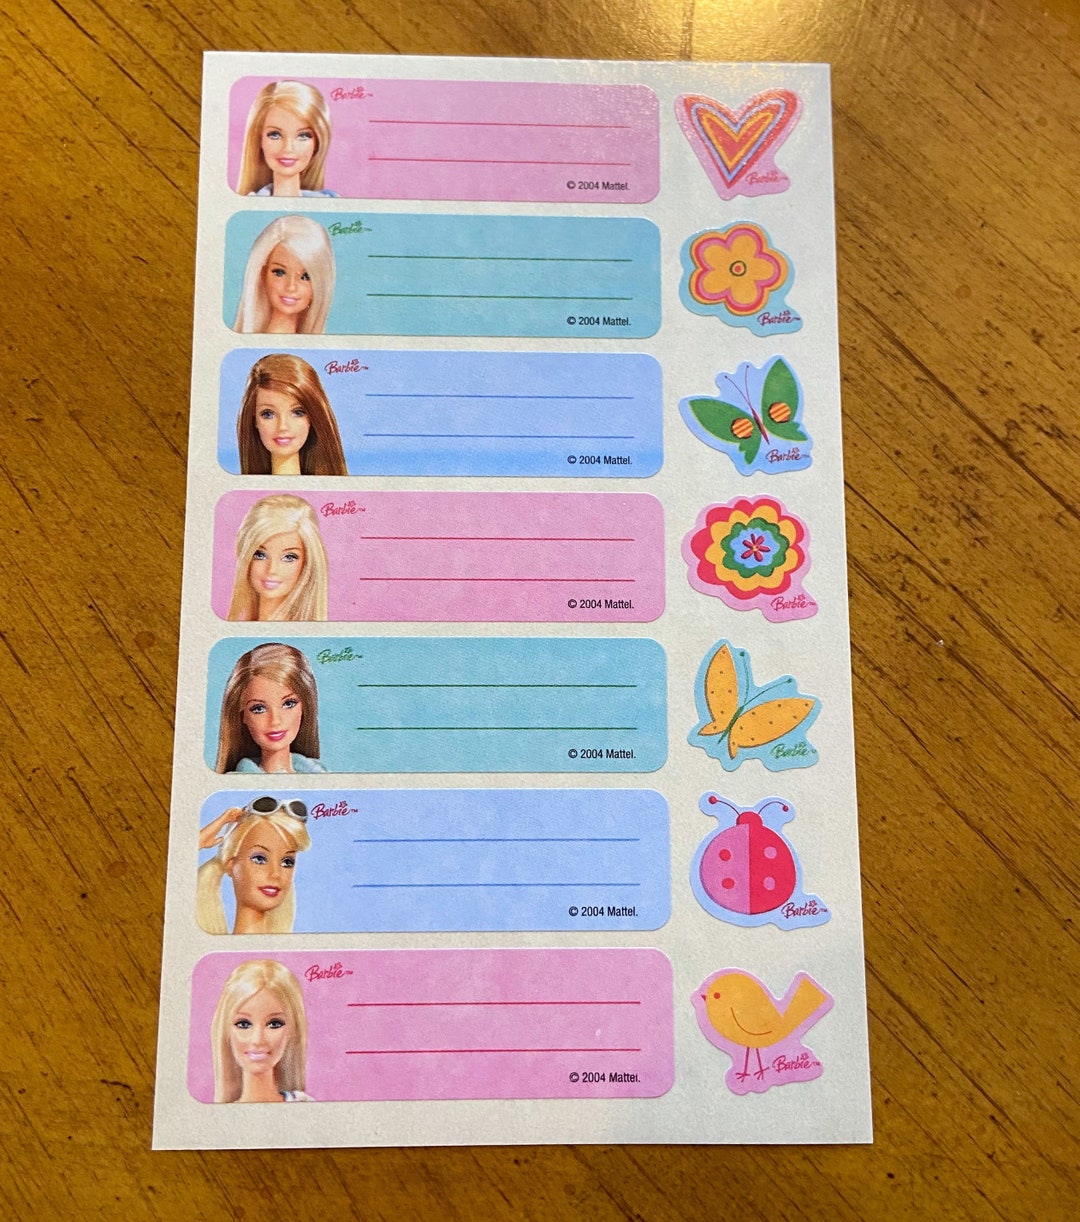 Barbie Sticker for Sale by Boy From North